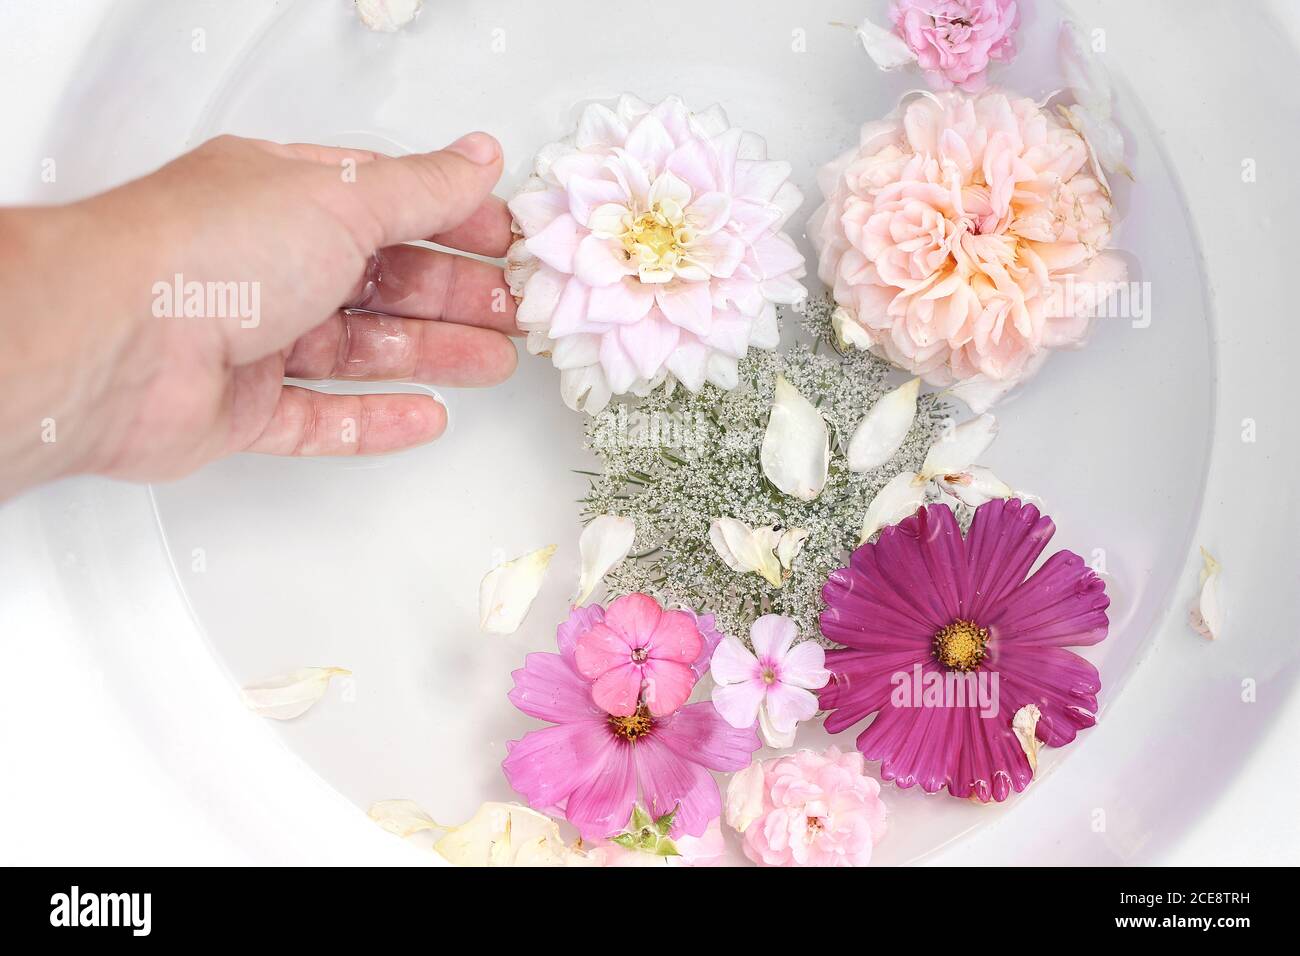 Spa, regeneration concept. Closeup of woman hand. Pink phlox, roses, dahlia and cosmos flowers floating in white bowl of water. Feminine summer Stock Photo